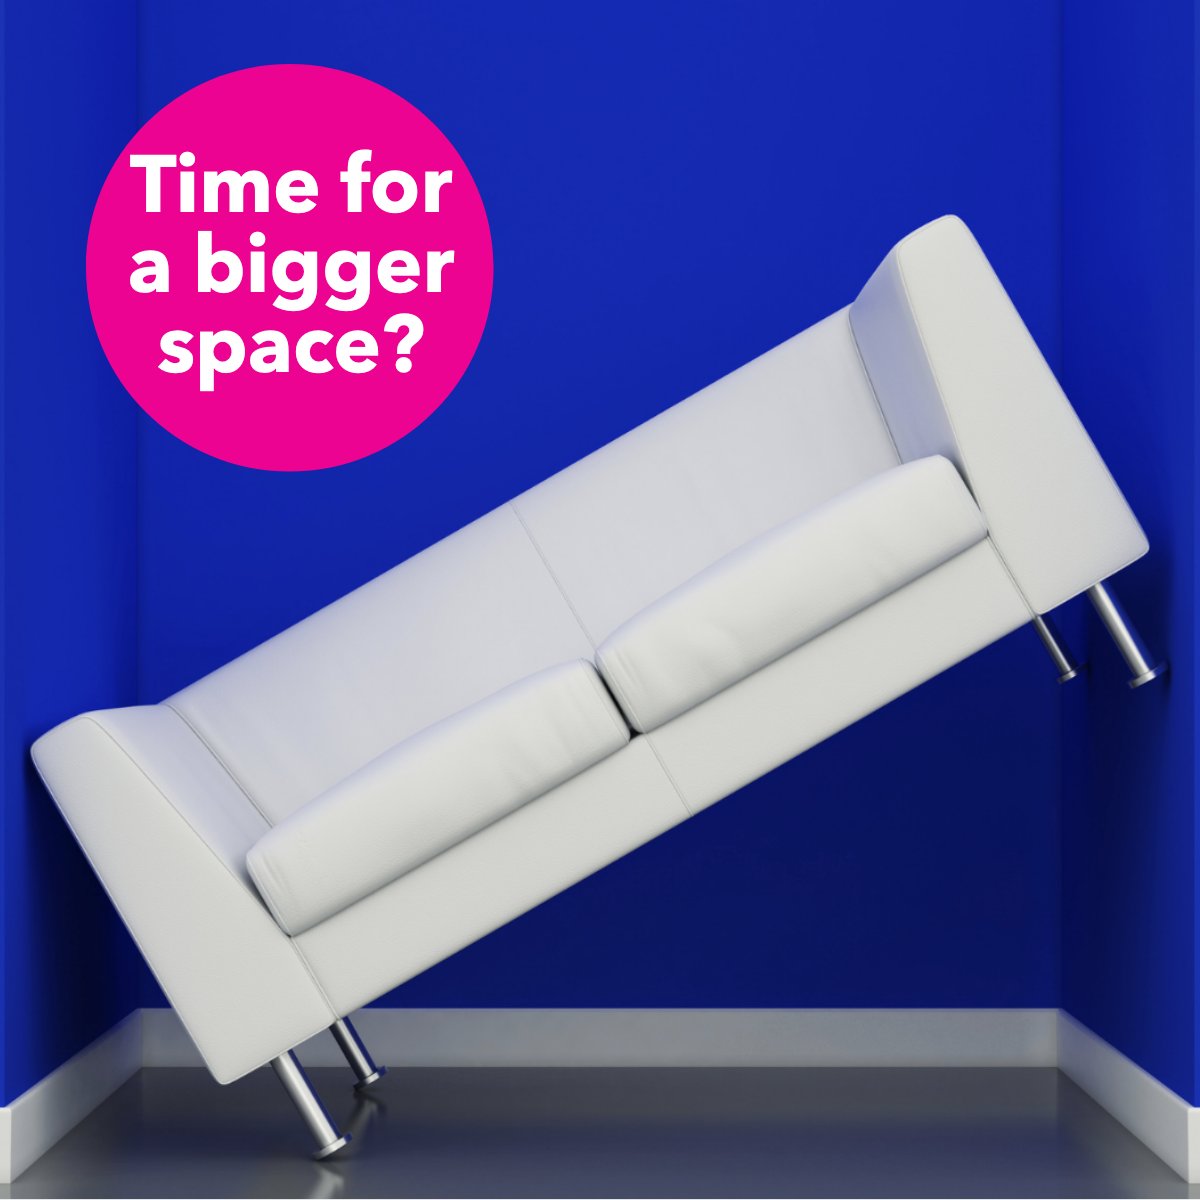 Are you ready for a bigger space? 🤔 Let us know below! #spaces #spacedesign #spacer #biggerspaces